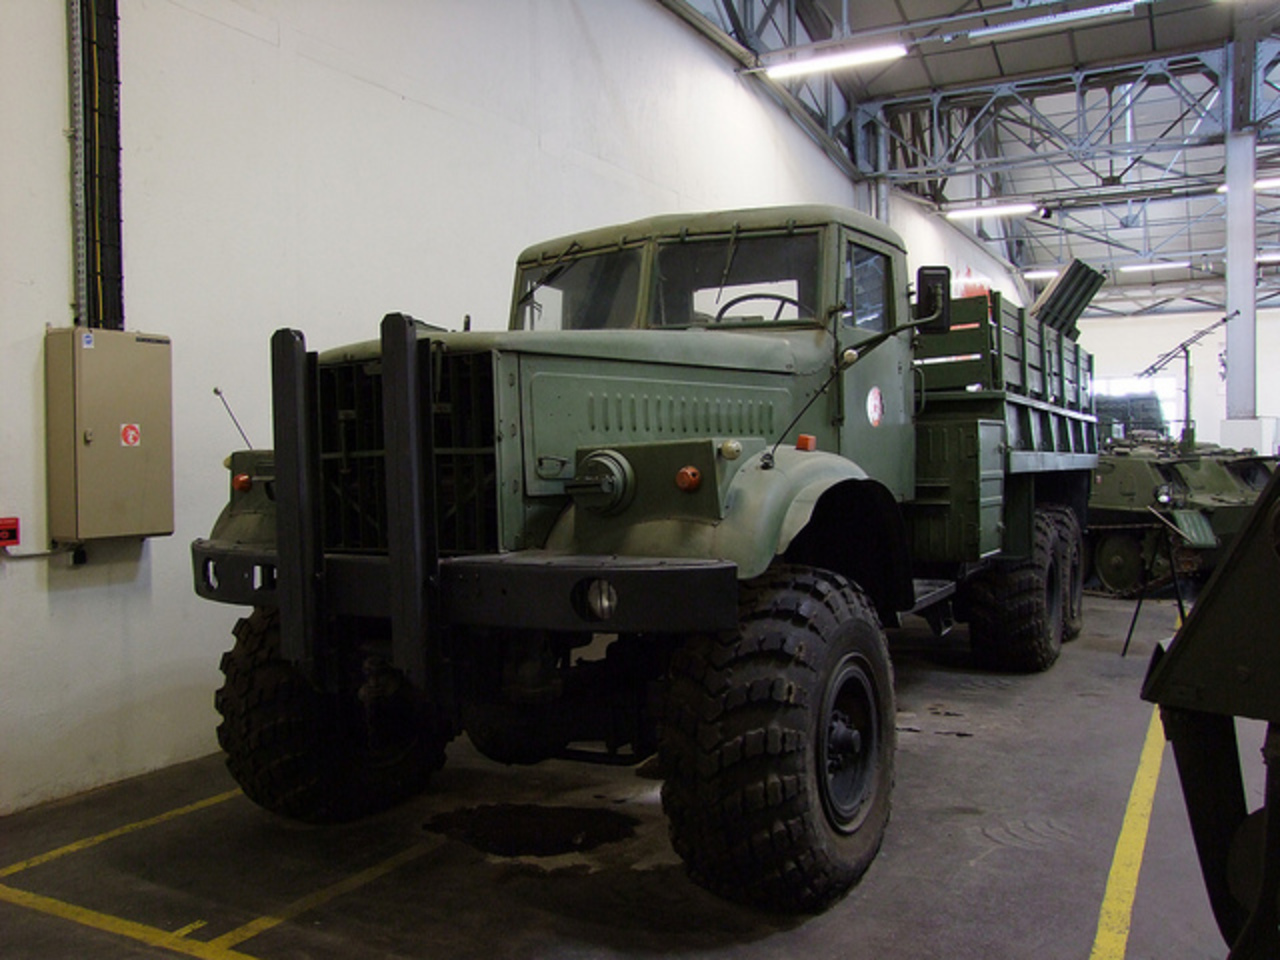 KrAZ 255 L: Photo gallery, complete information about model ...